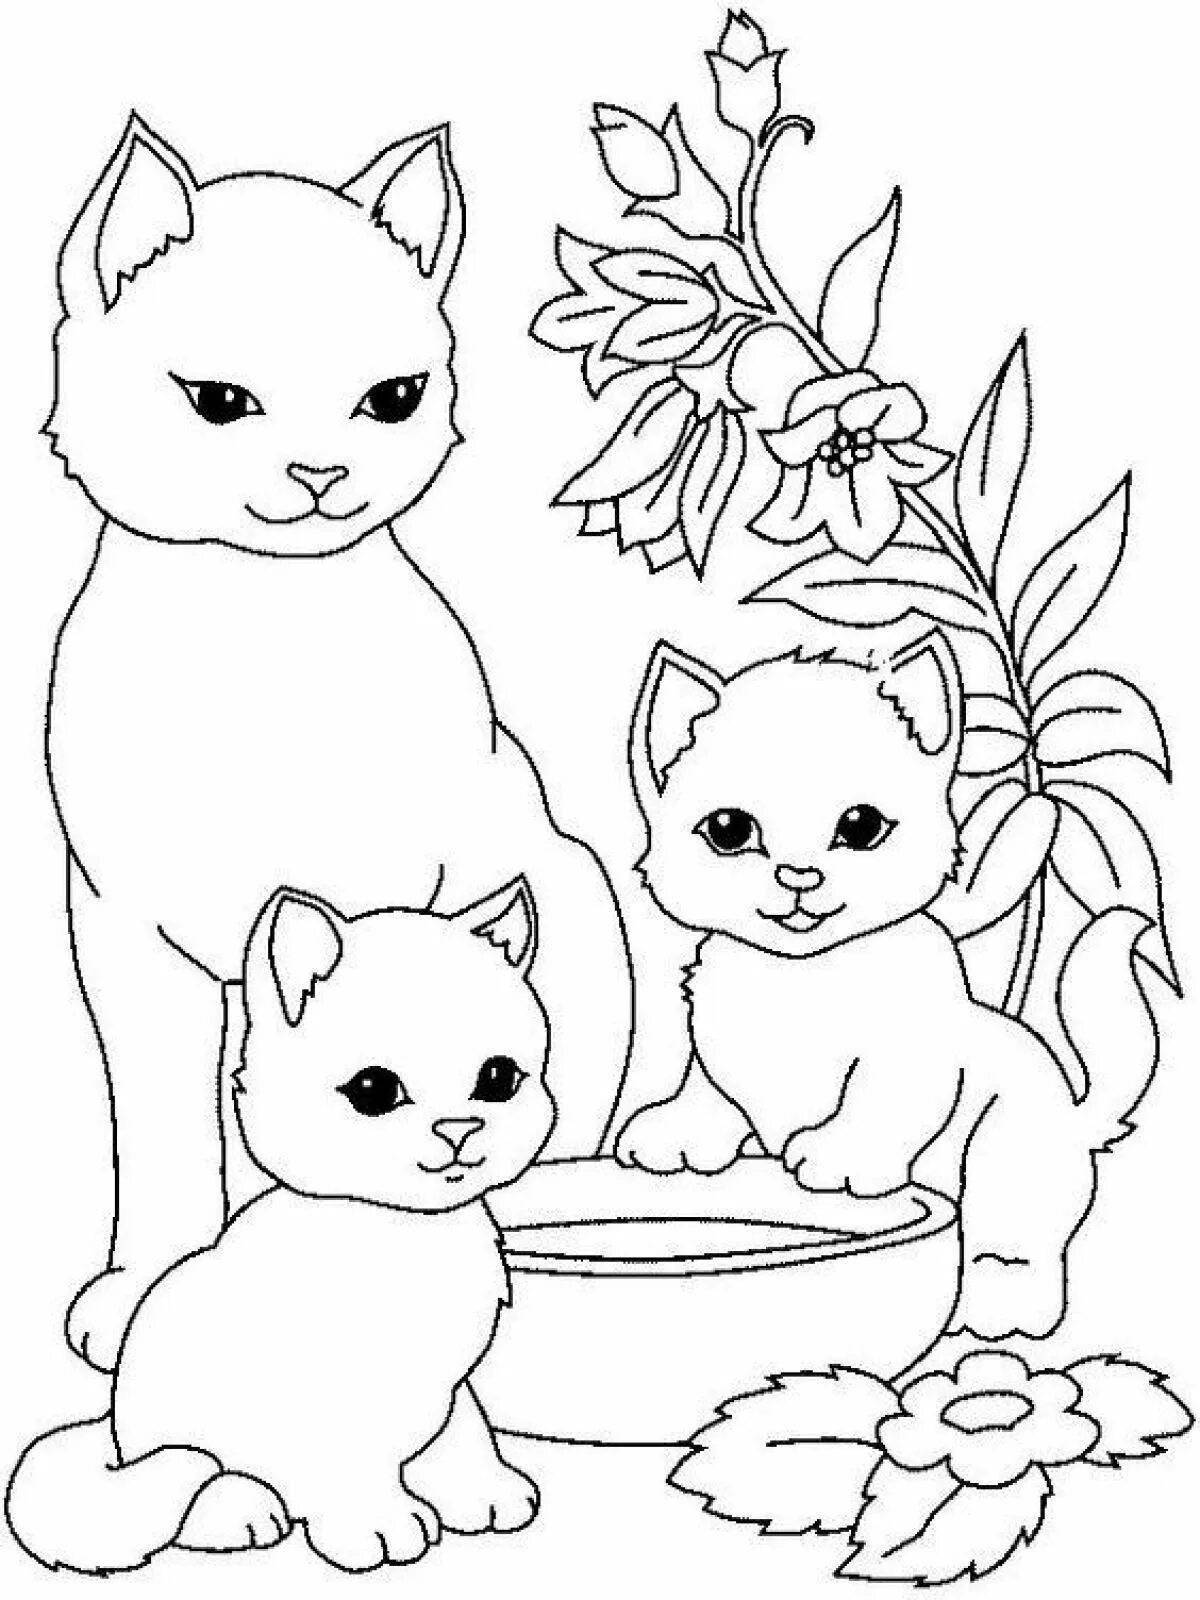 Coloring-inspiration coloring page книжка-раскраска